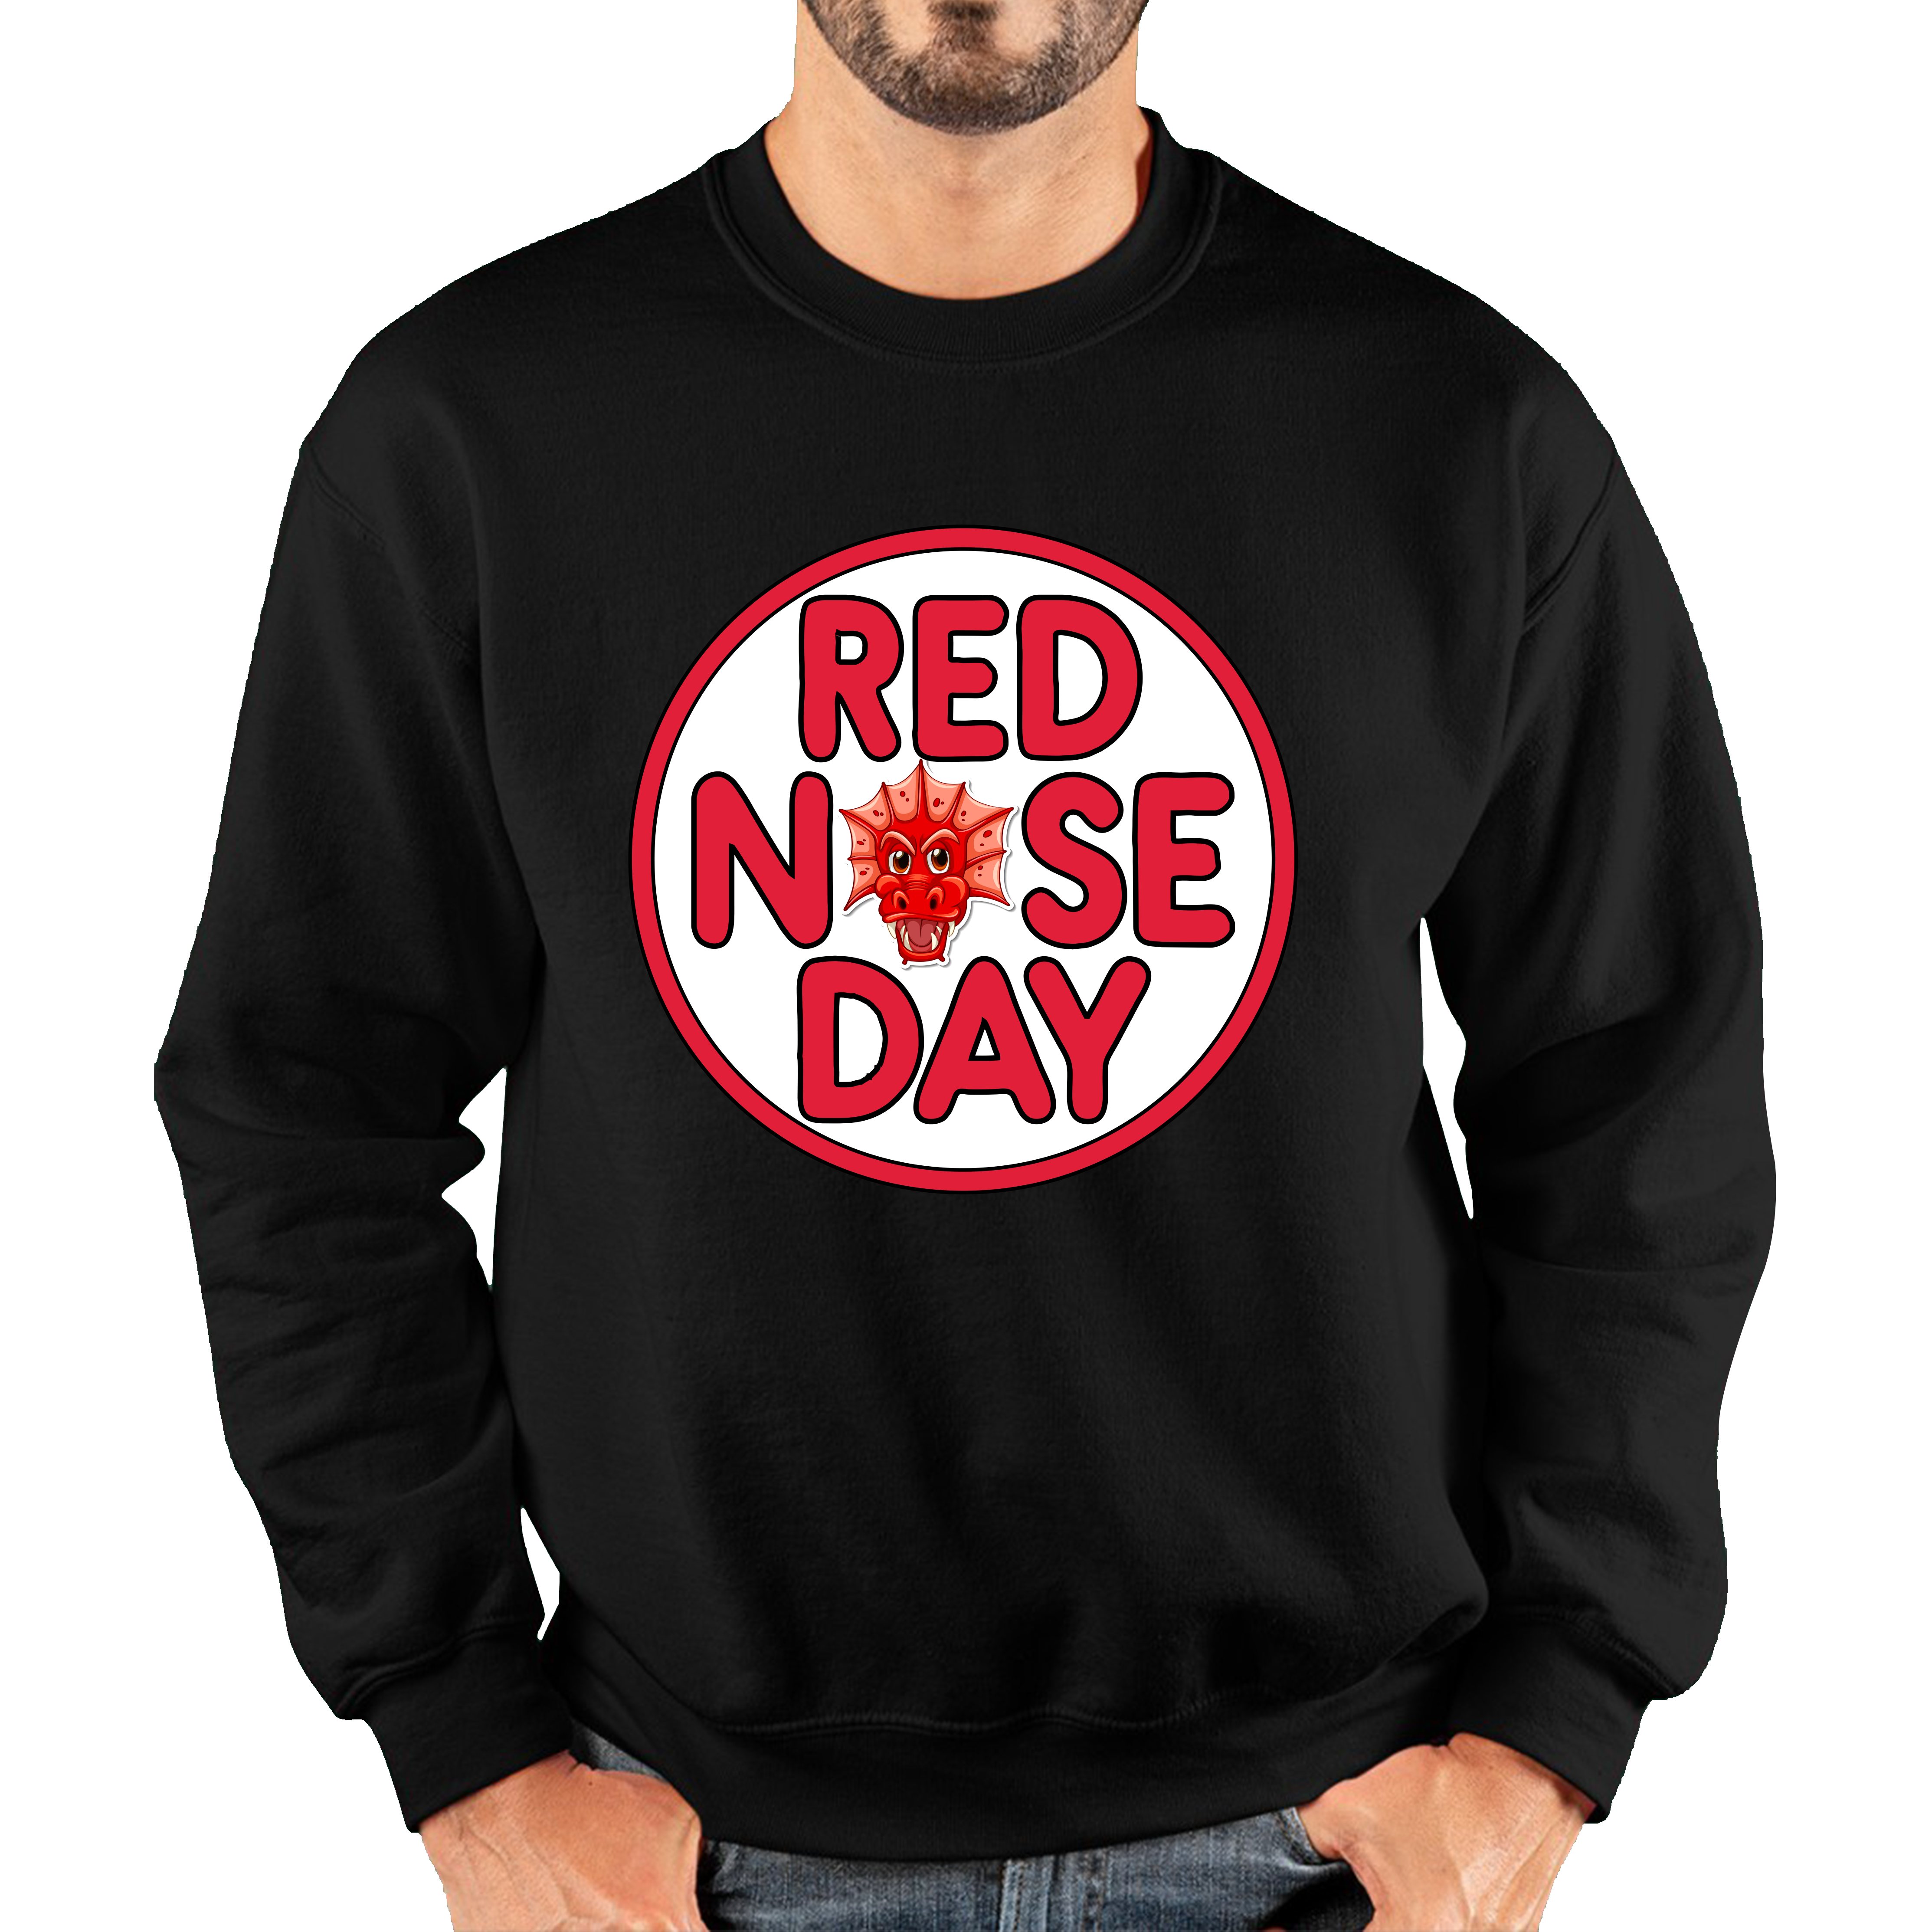 Dragon Face Red Nose Day Adult Sweatshirt. 50% Goes To Charity